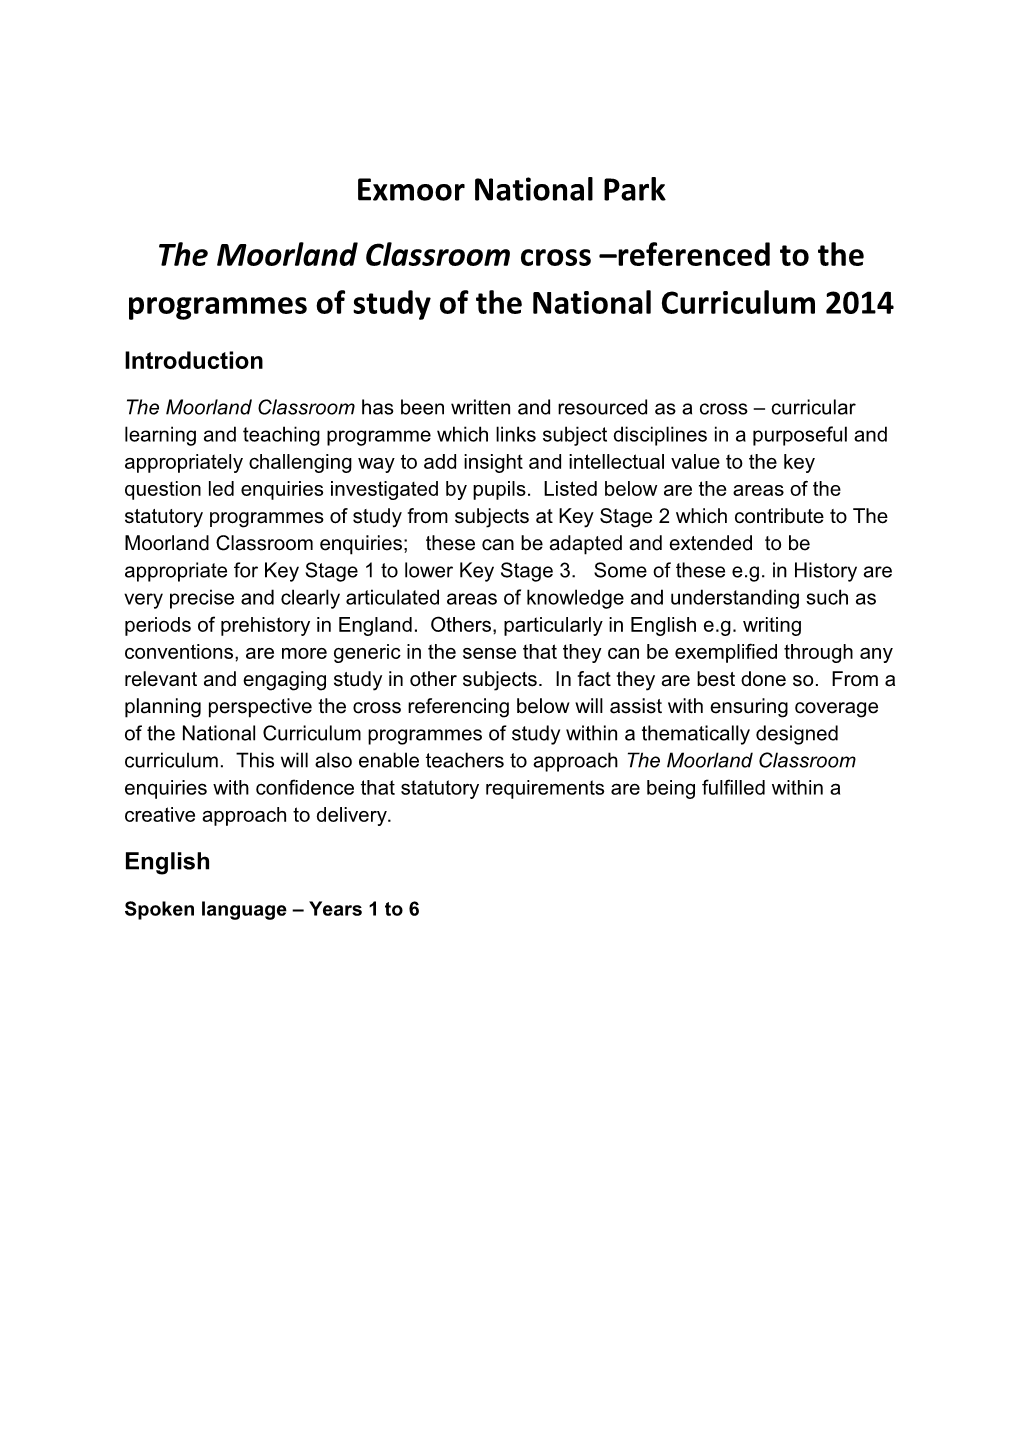 The Moorland Classroomcross Referenced to the Programmes of Study of the National Curriculum